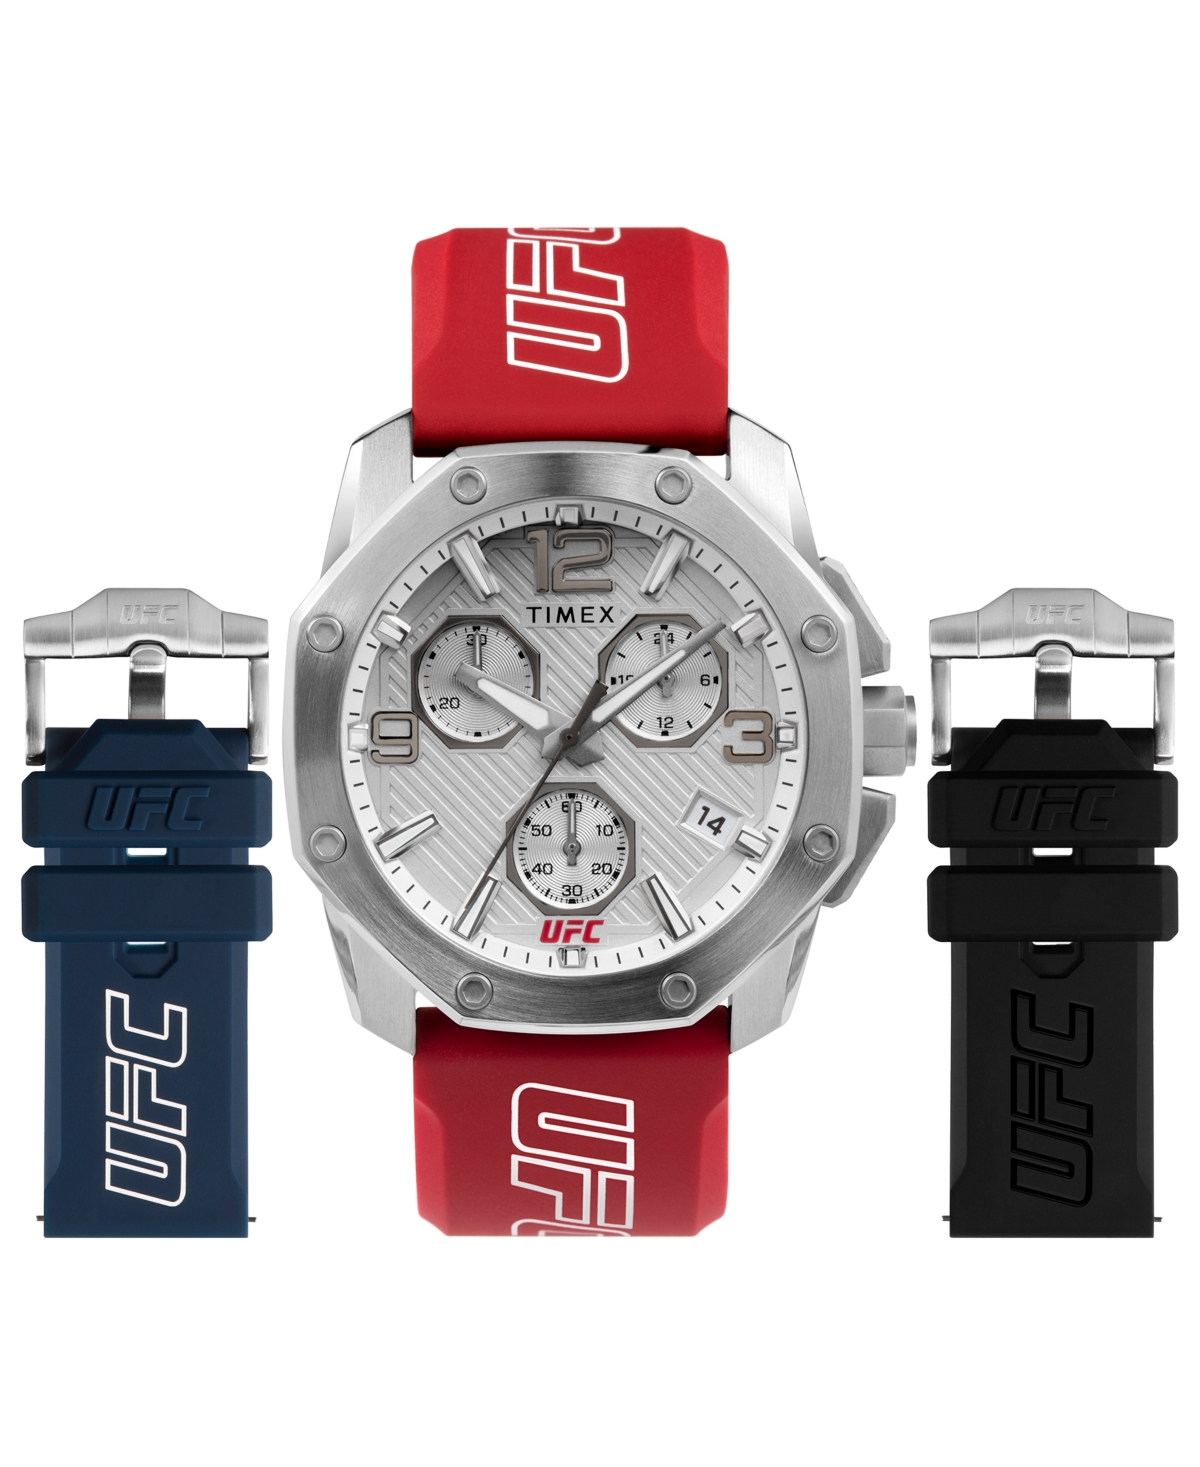 Timex Ufc Men's Quartz Icon Red Silicone Watch 45mm And Strap Gift Set